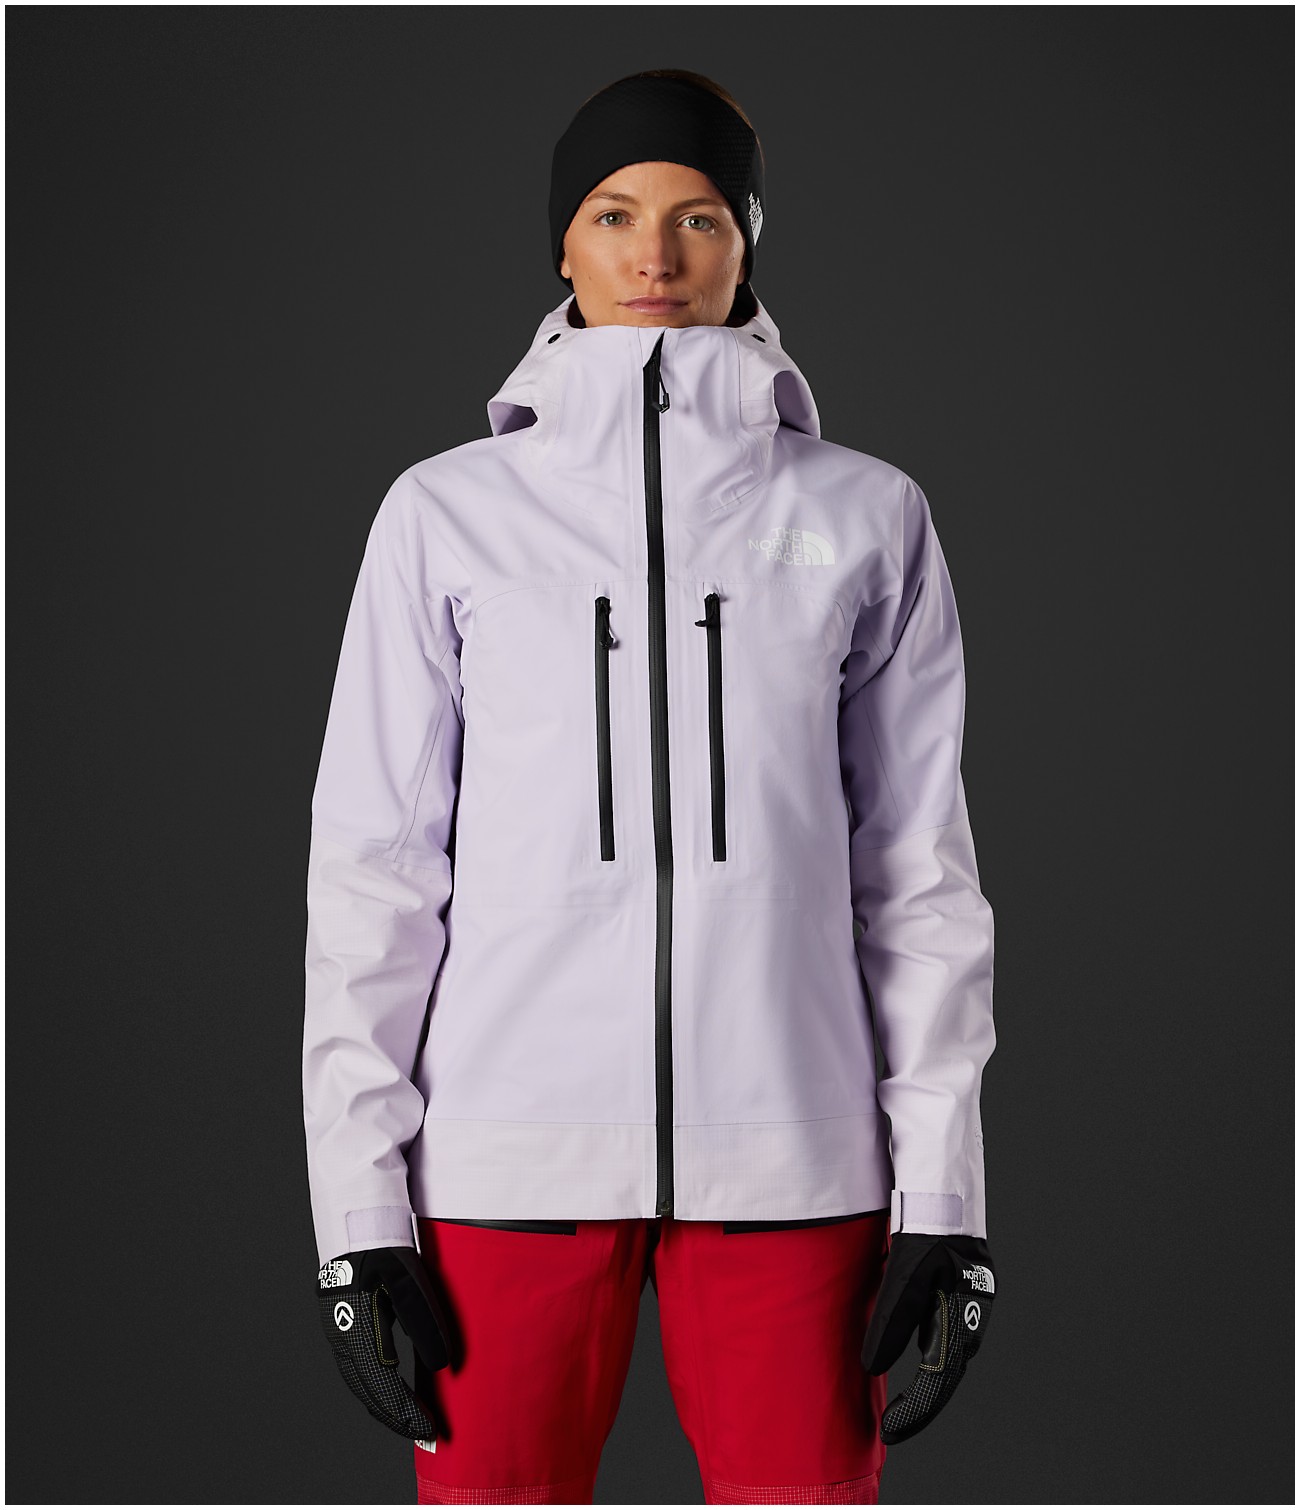 Women's Premium Apparel and Gear | The North Face